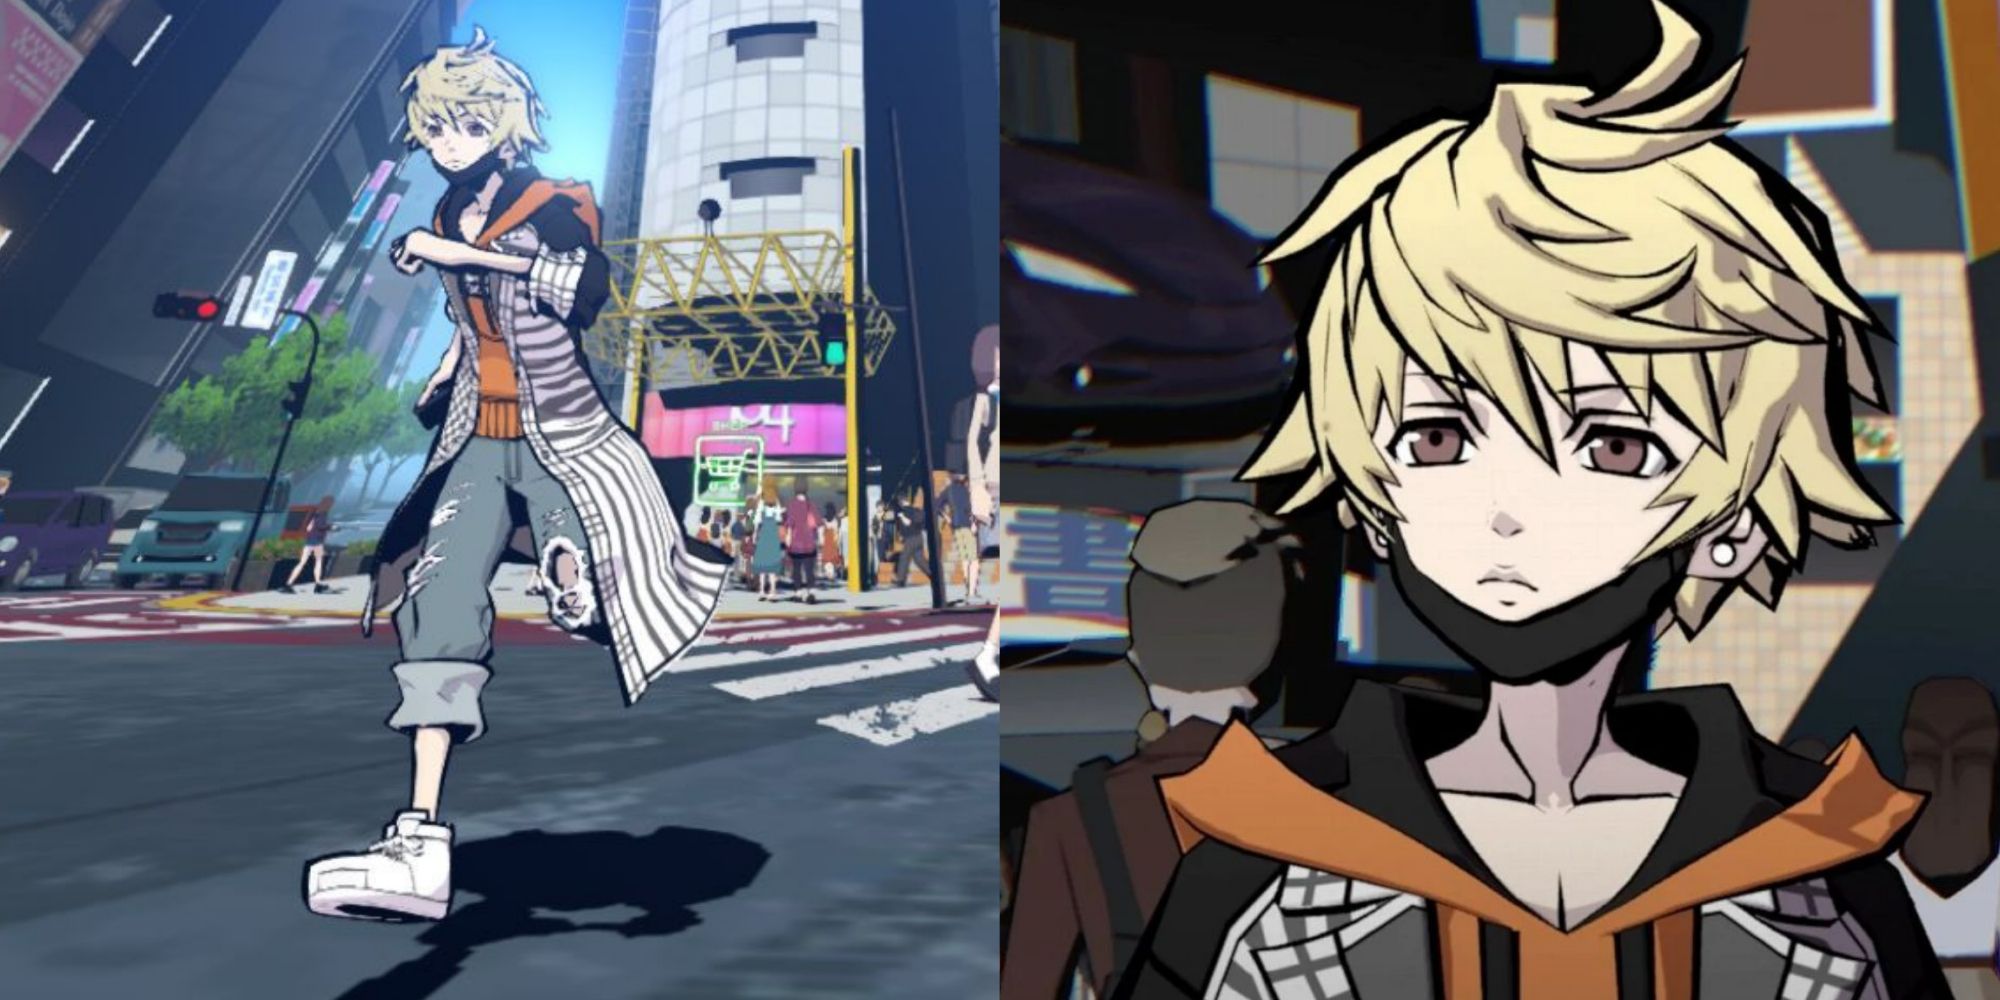 Split screenshots of Rindo Kanade's full outfit and a close up of Rindo in NEO The World Ends With You